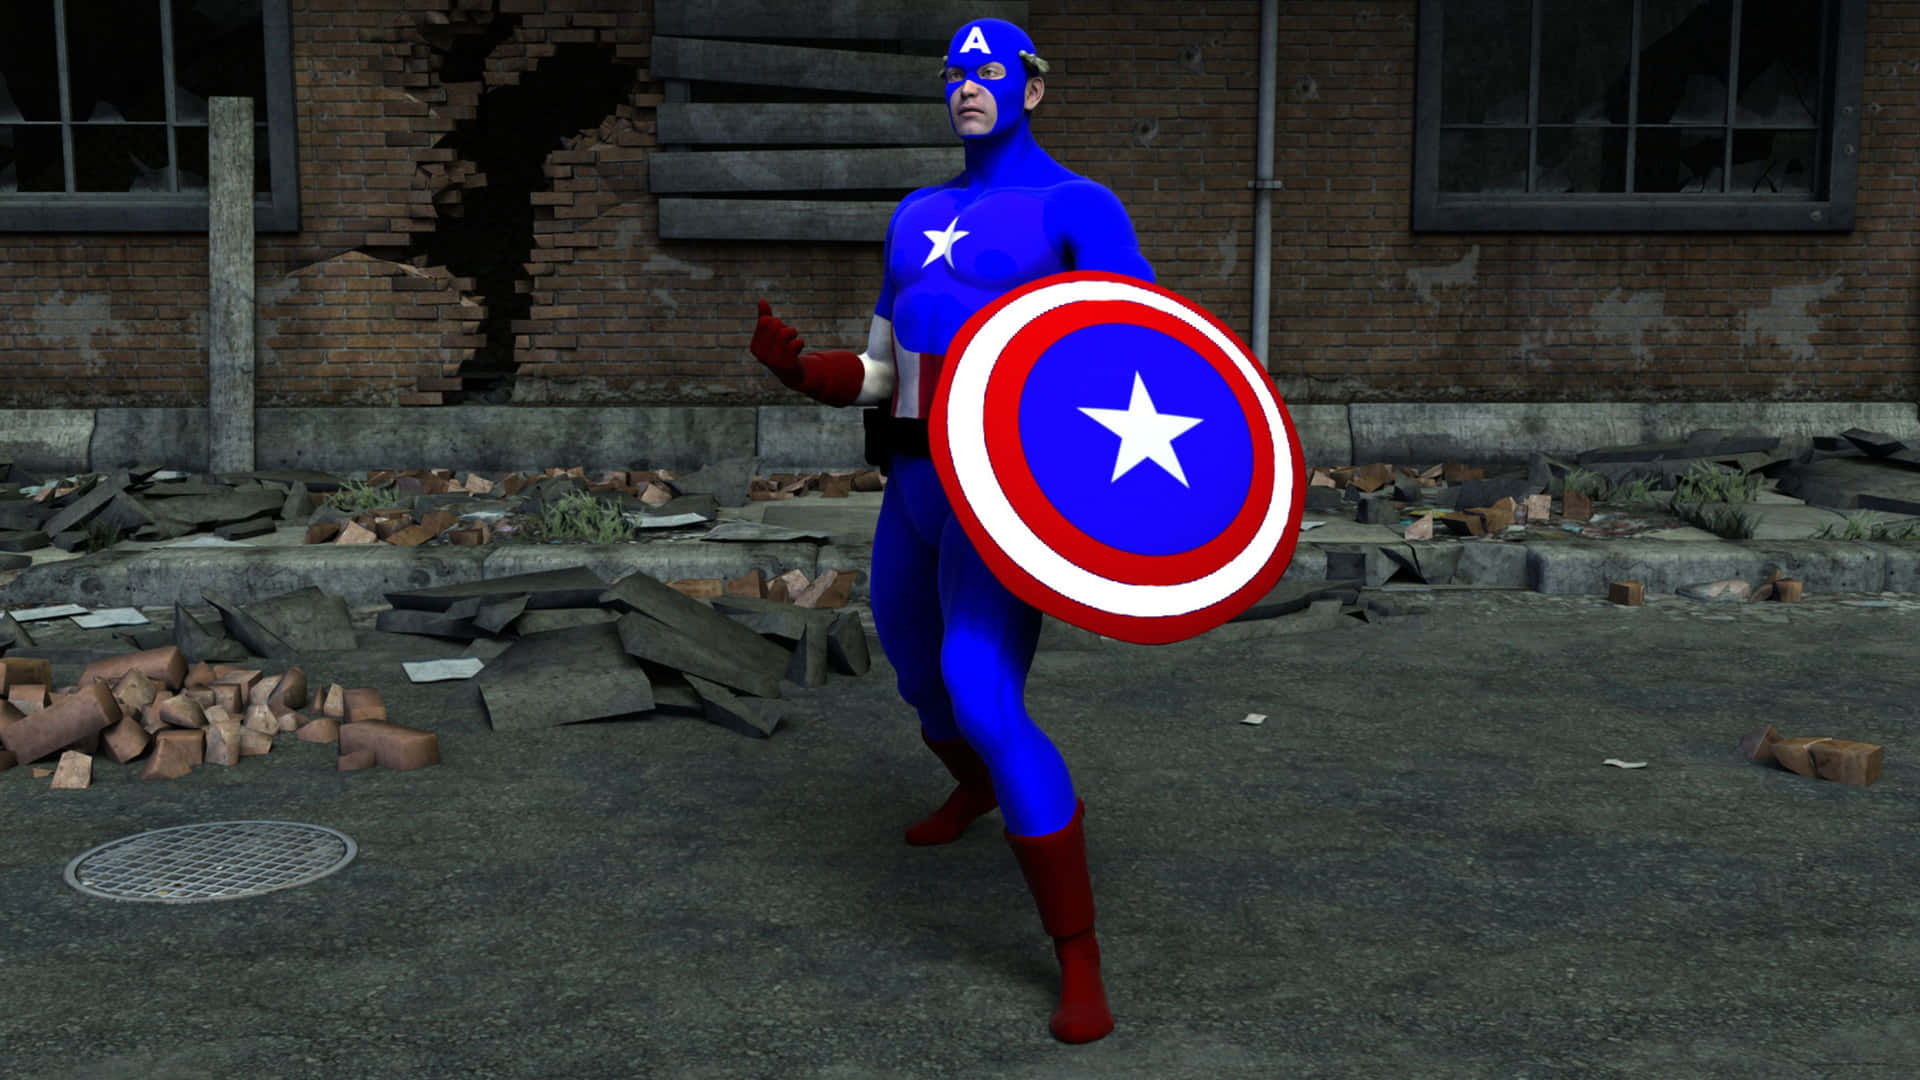 Capt. America stands ready, his iconic shield ready for battle.